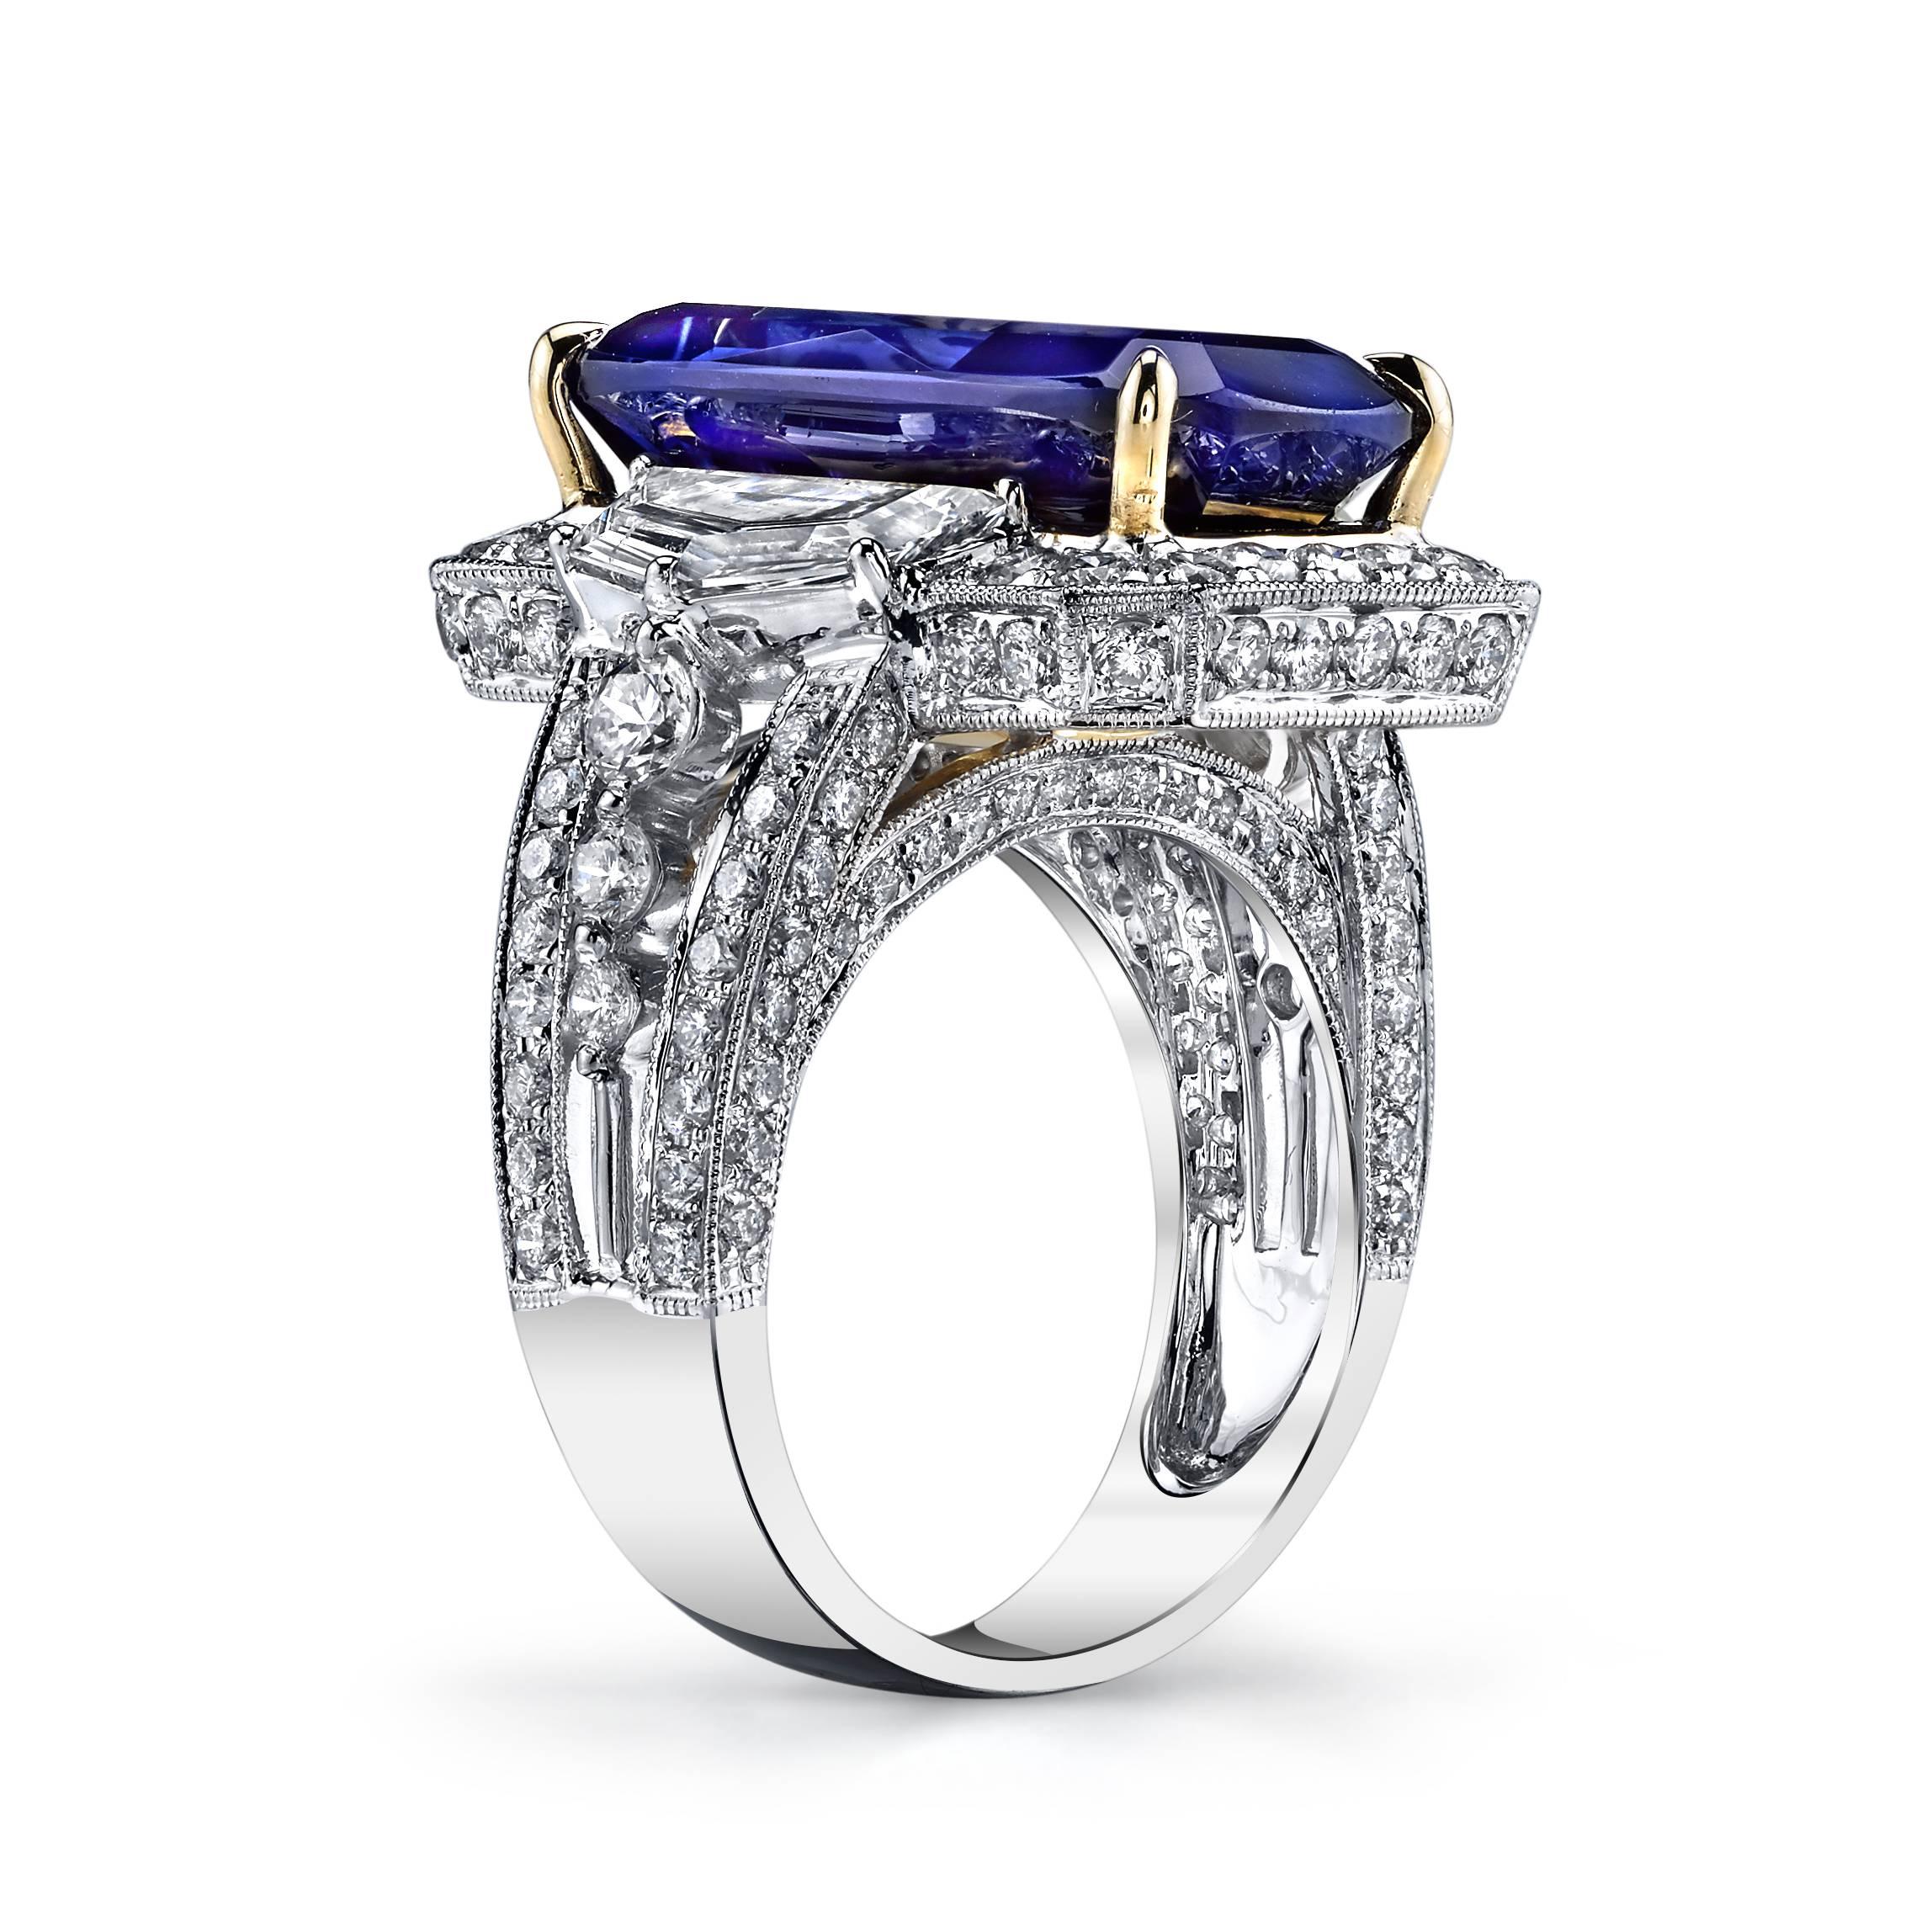 This spectacular ring full of detail features a 17 carat top gem quality vivid purple blue tanzanite, set with two trapezoid shaped diamonds.

Along the rest of the ring are 2 carats of round shape VS quality diamond, set in 18K white gold. 

A true